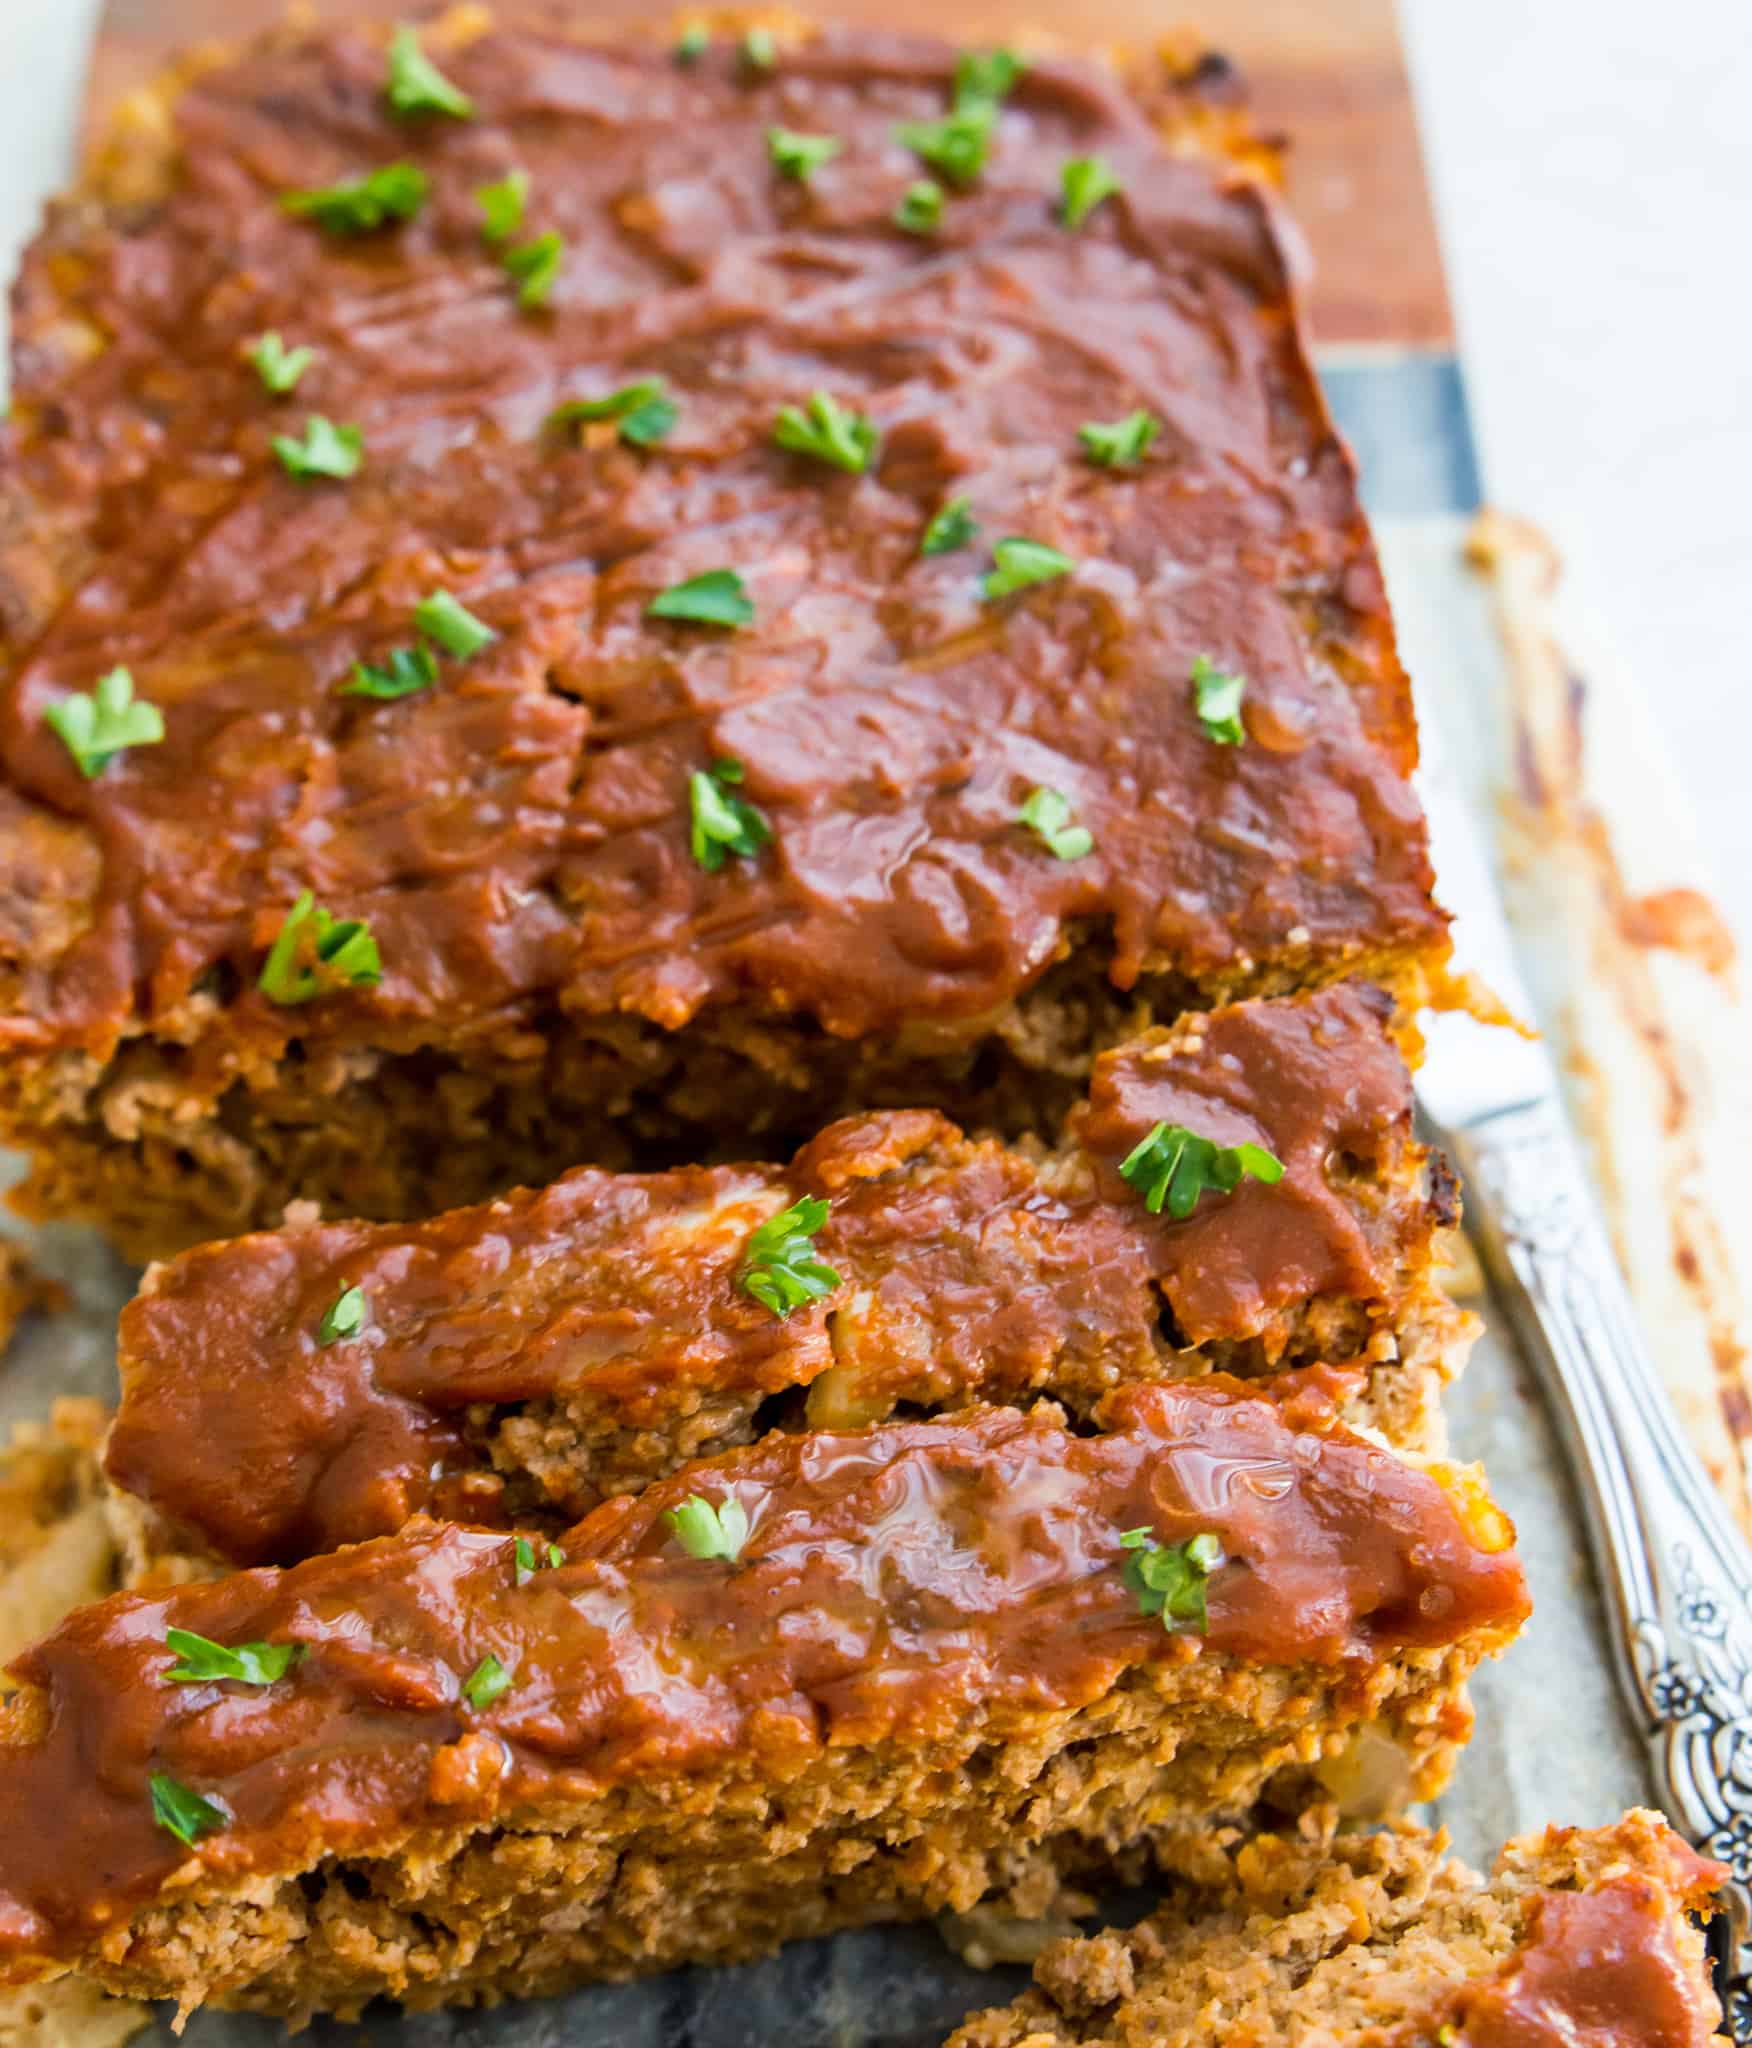 A gluten free meatloaf with bbq sauce on top, cut up on a platter.